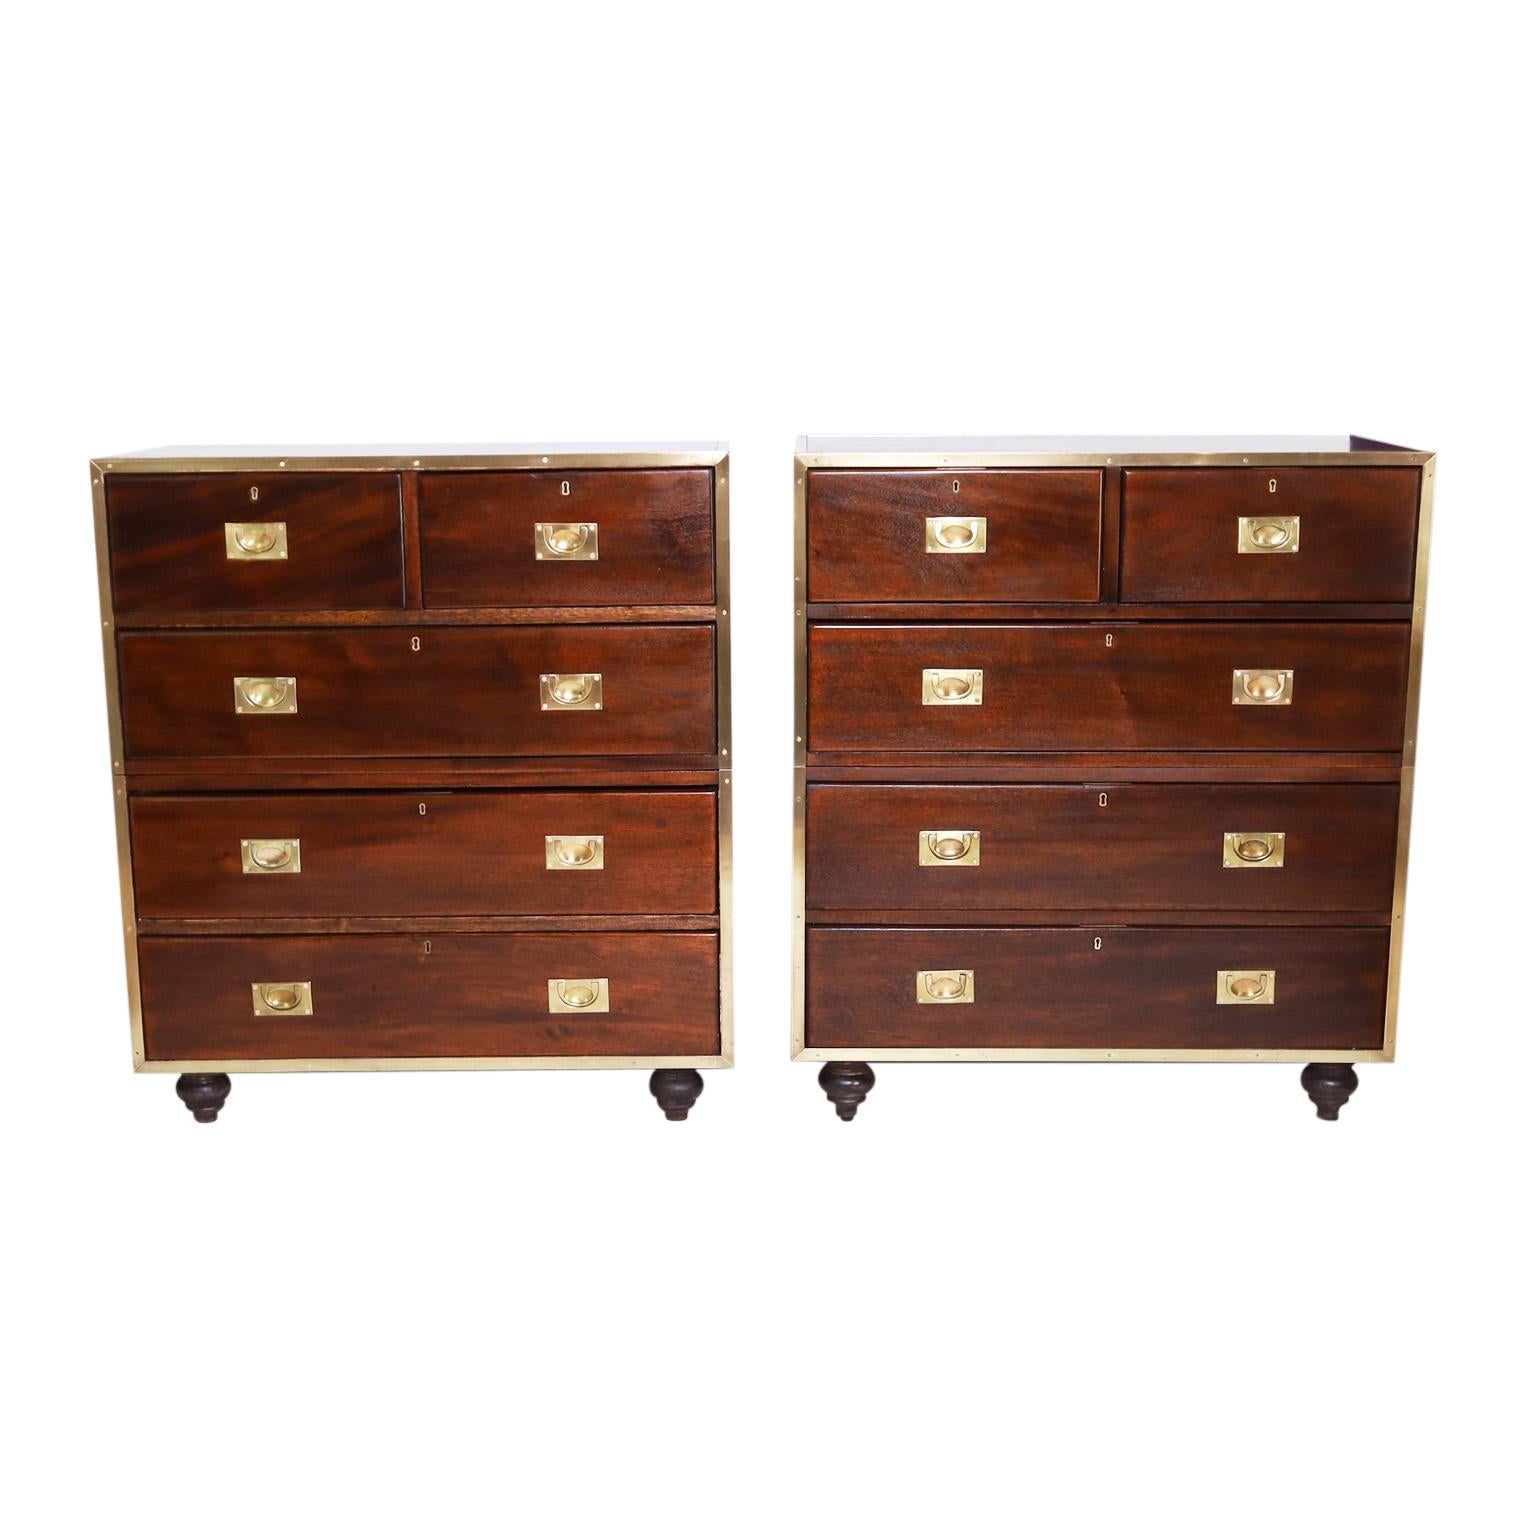 Impressive pair of English antique five drawer campaign chests crafted in mahogany in a two piece construction with brass hardware and turned feet. Signed Shapland & Petter one of Englands oldest furniture makers.